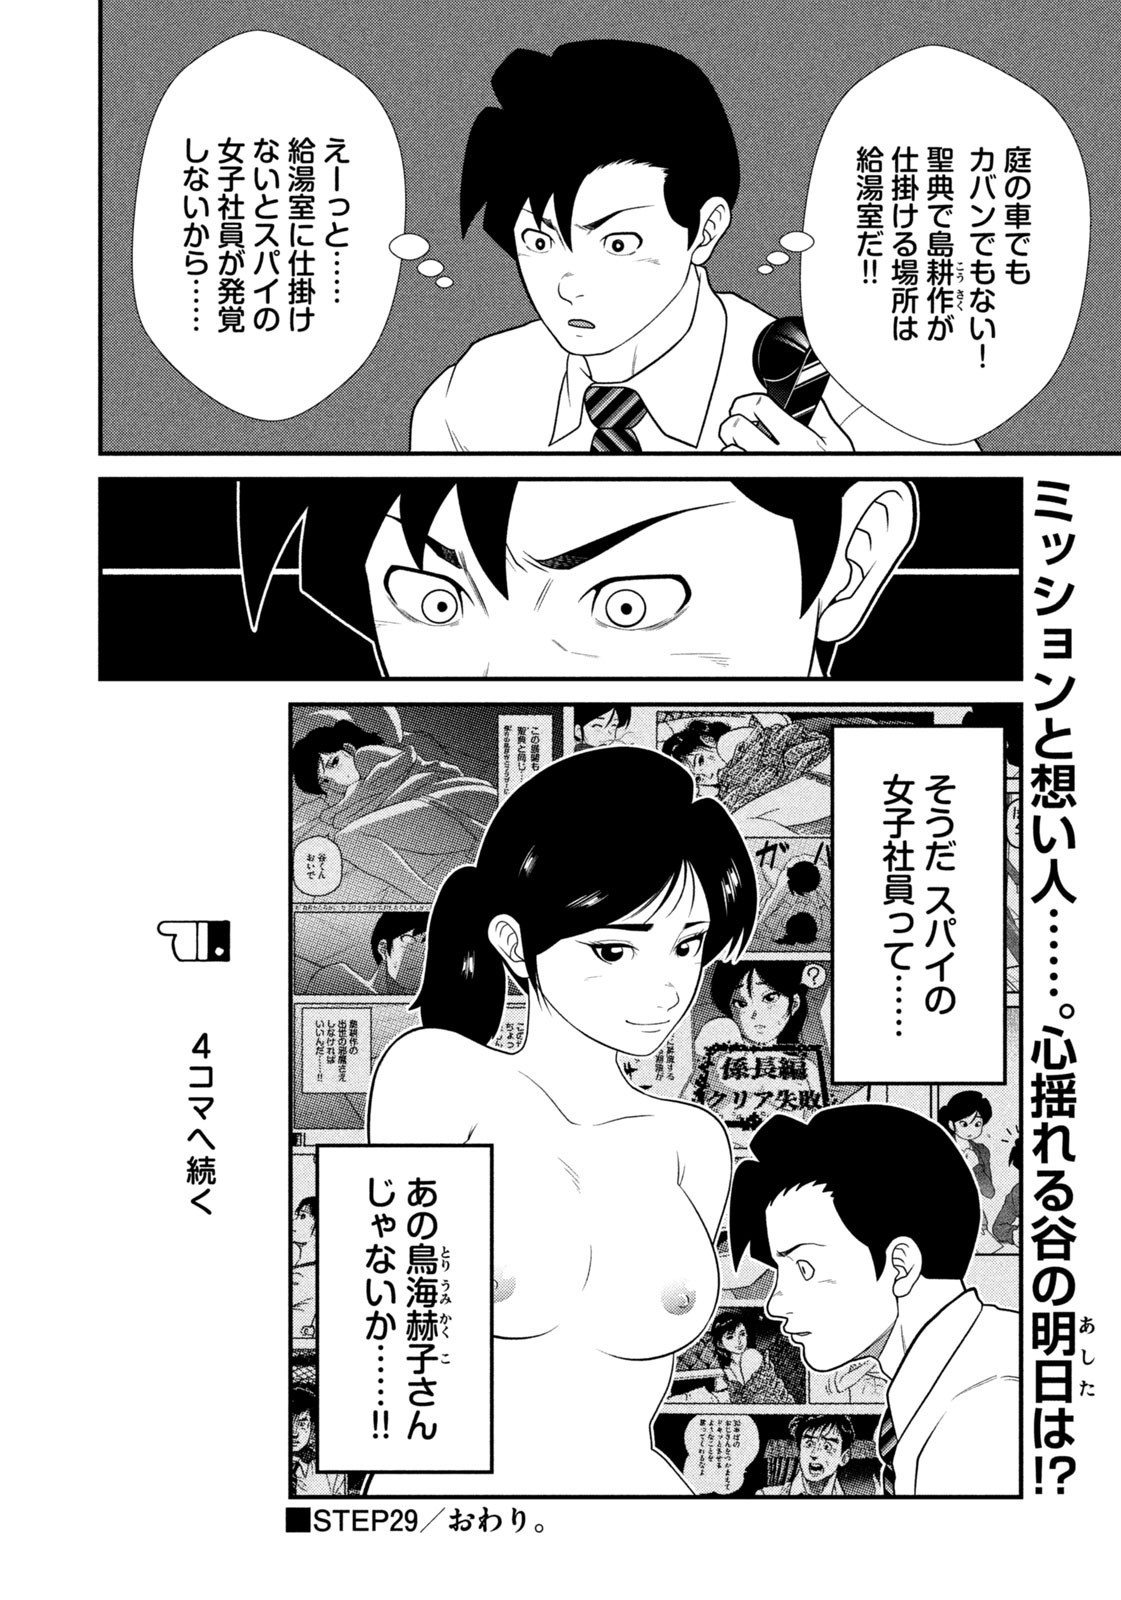 Weekly Morning - 週刊モーニング - Chapter 2023-50 - Page 445